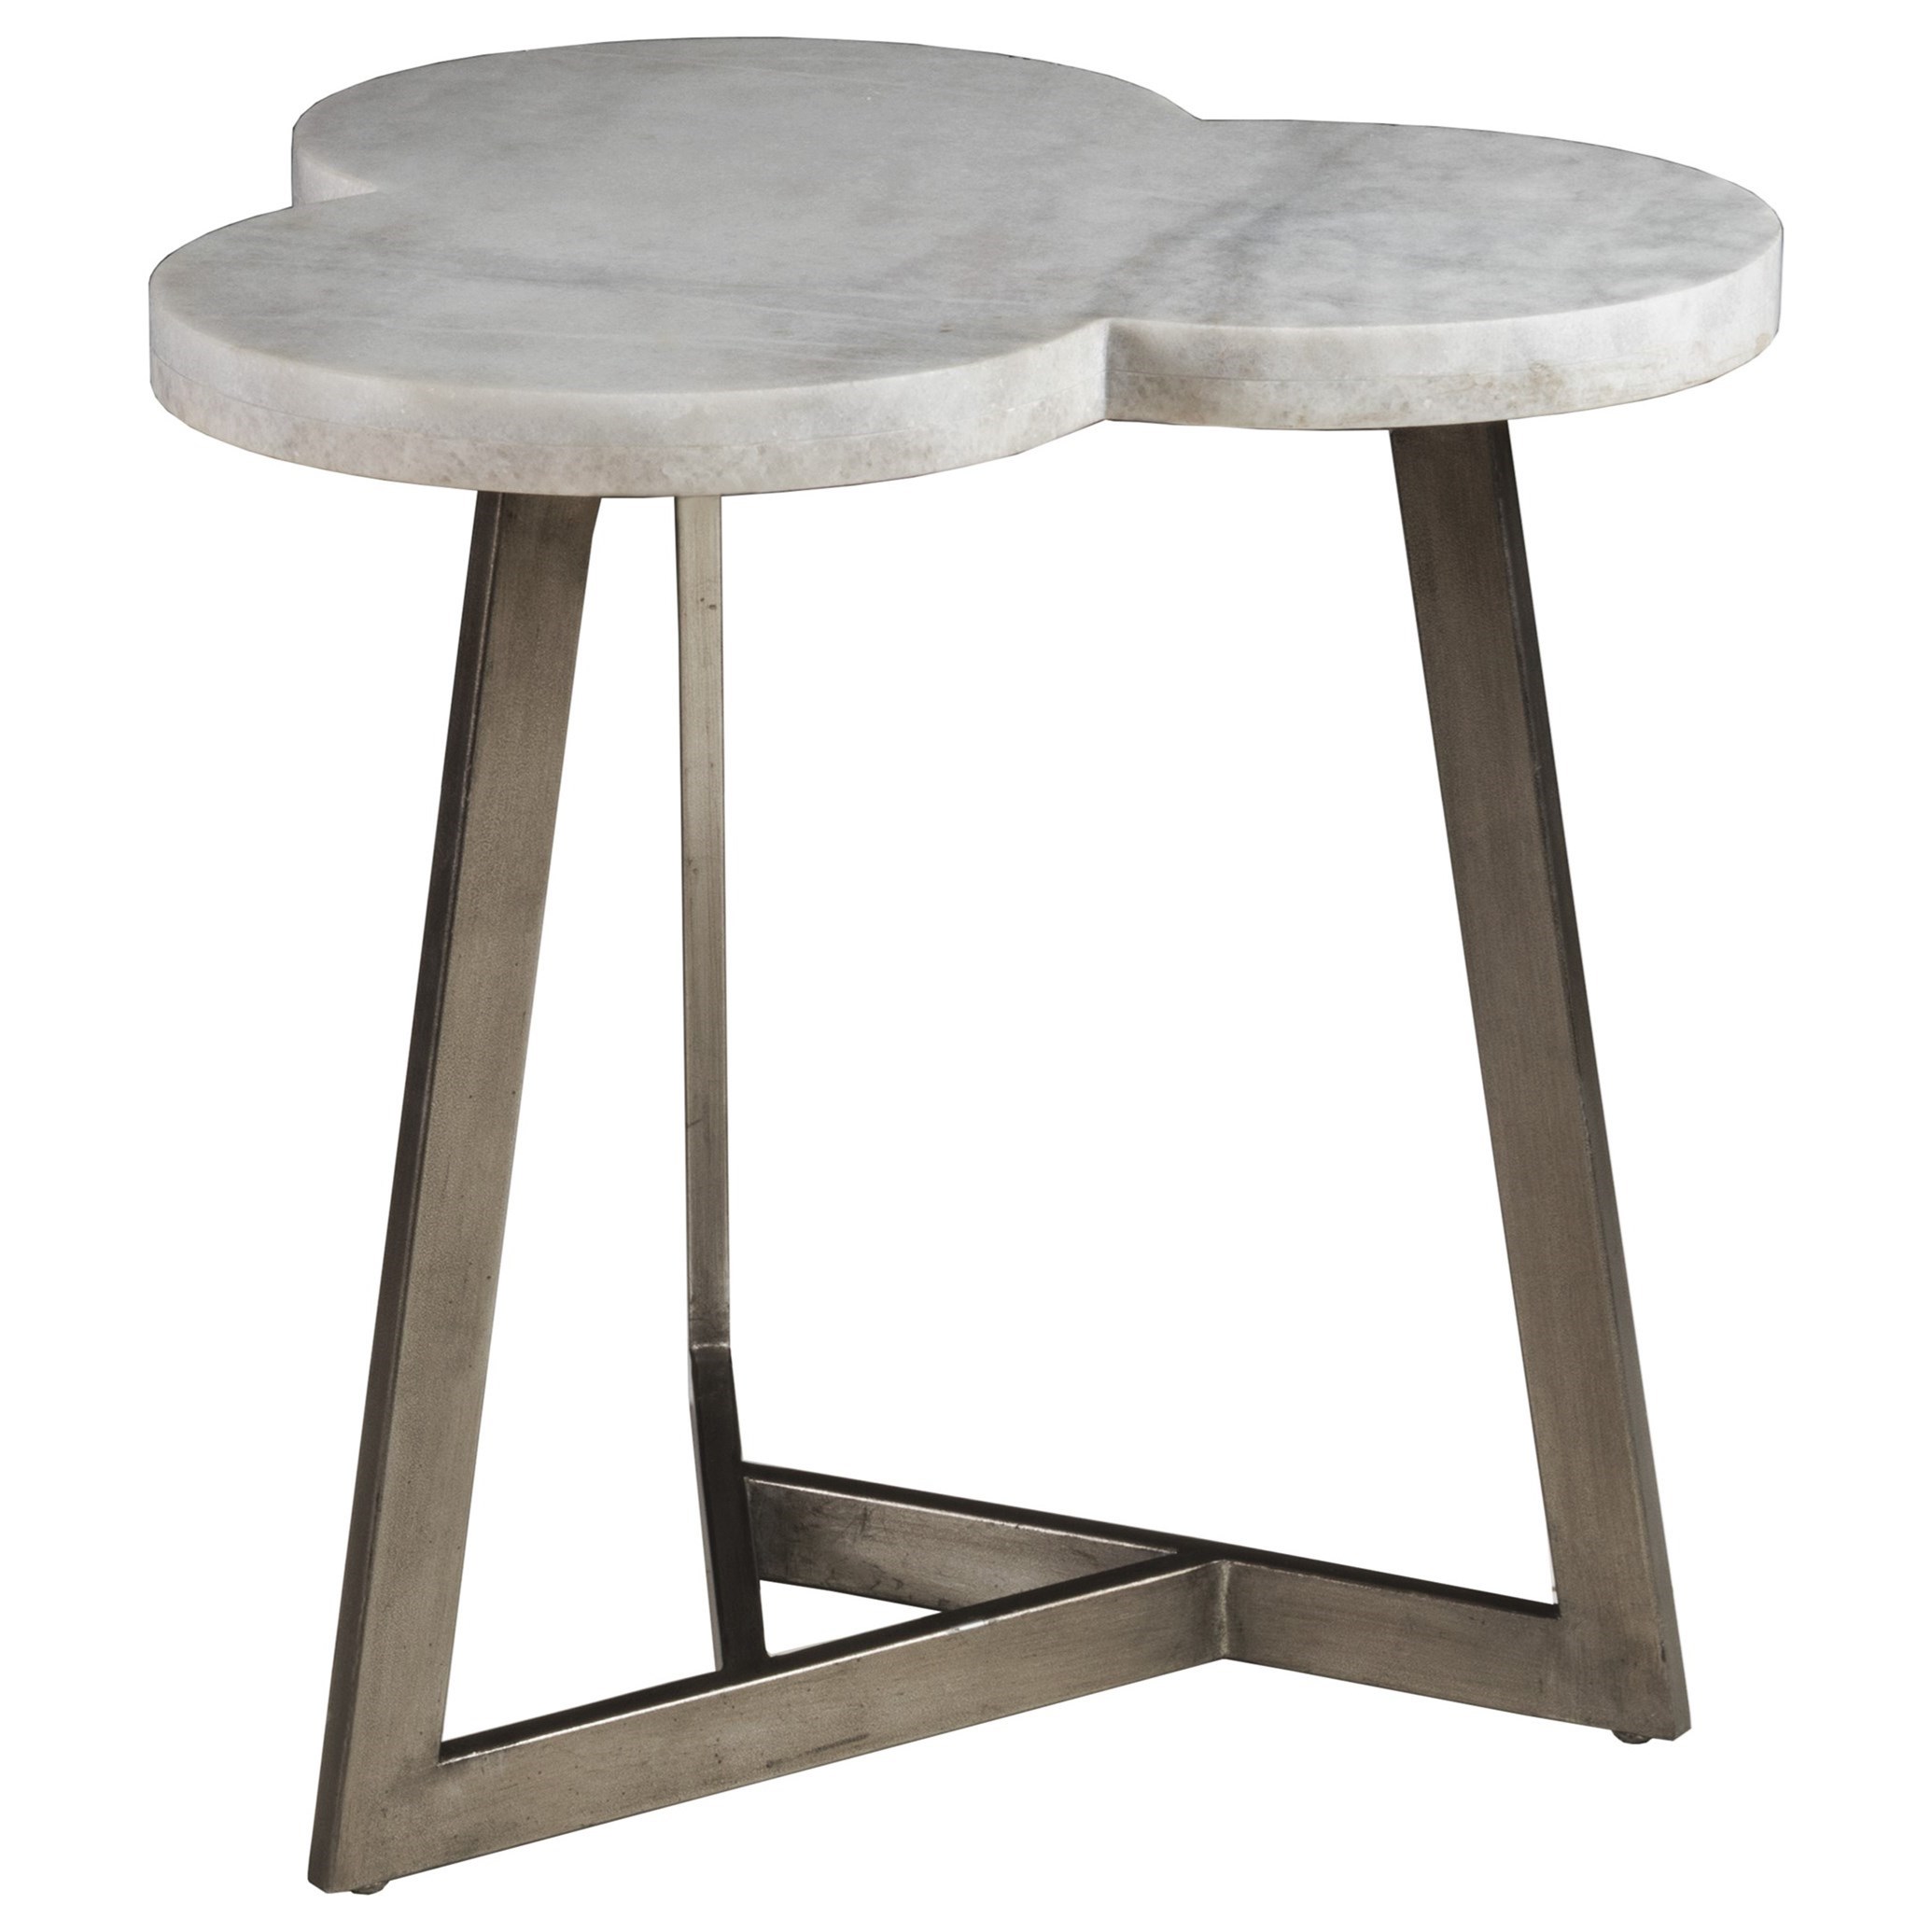 Contemporary Clover End Table with White Marble Top